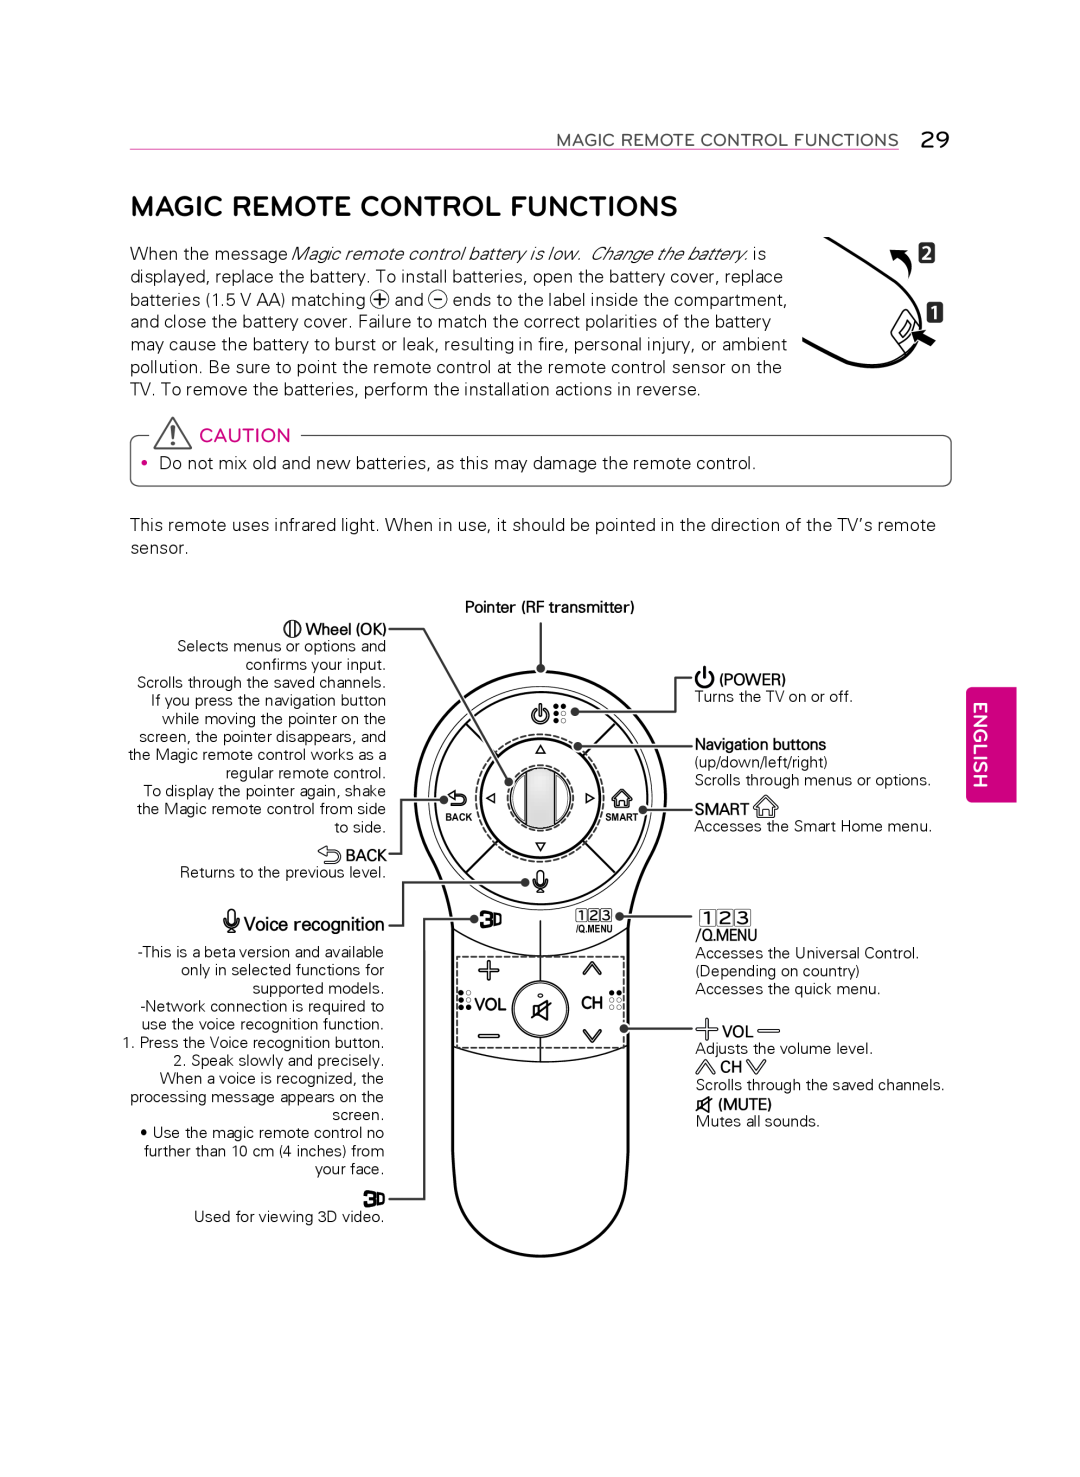 LG Electronics 55LA9650 owner manual Magic Remote Control Functions, English, Voice recognition, Vol Ch 